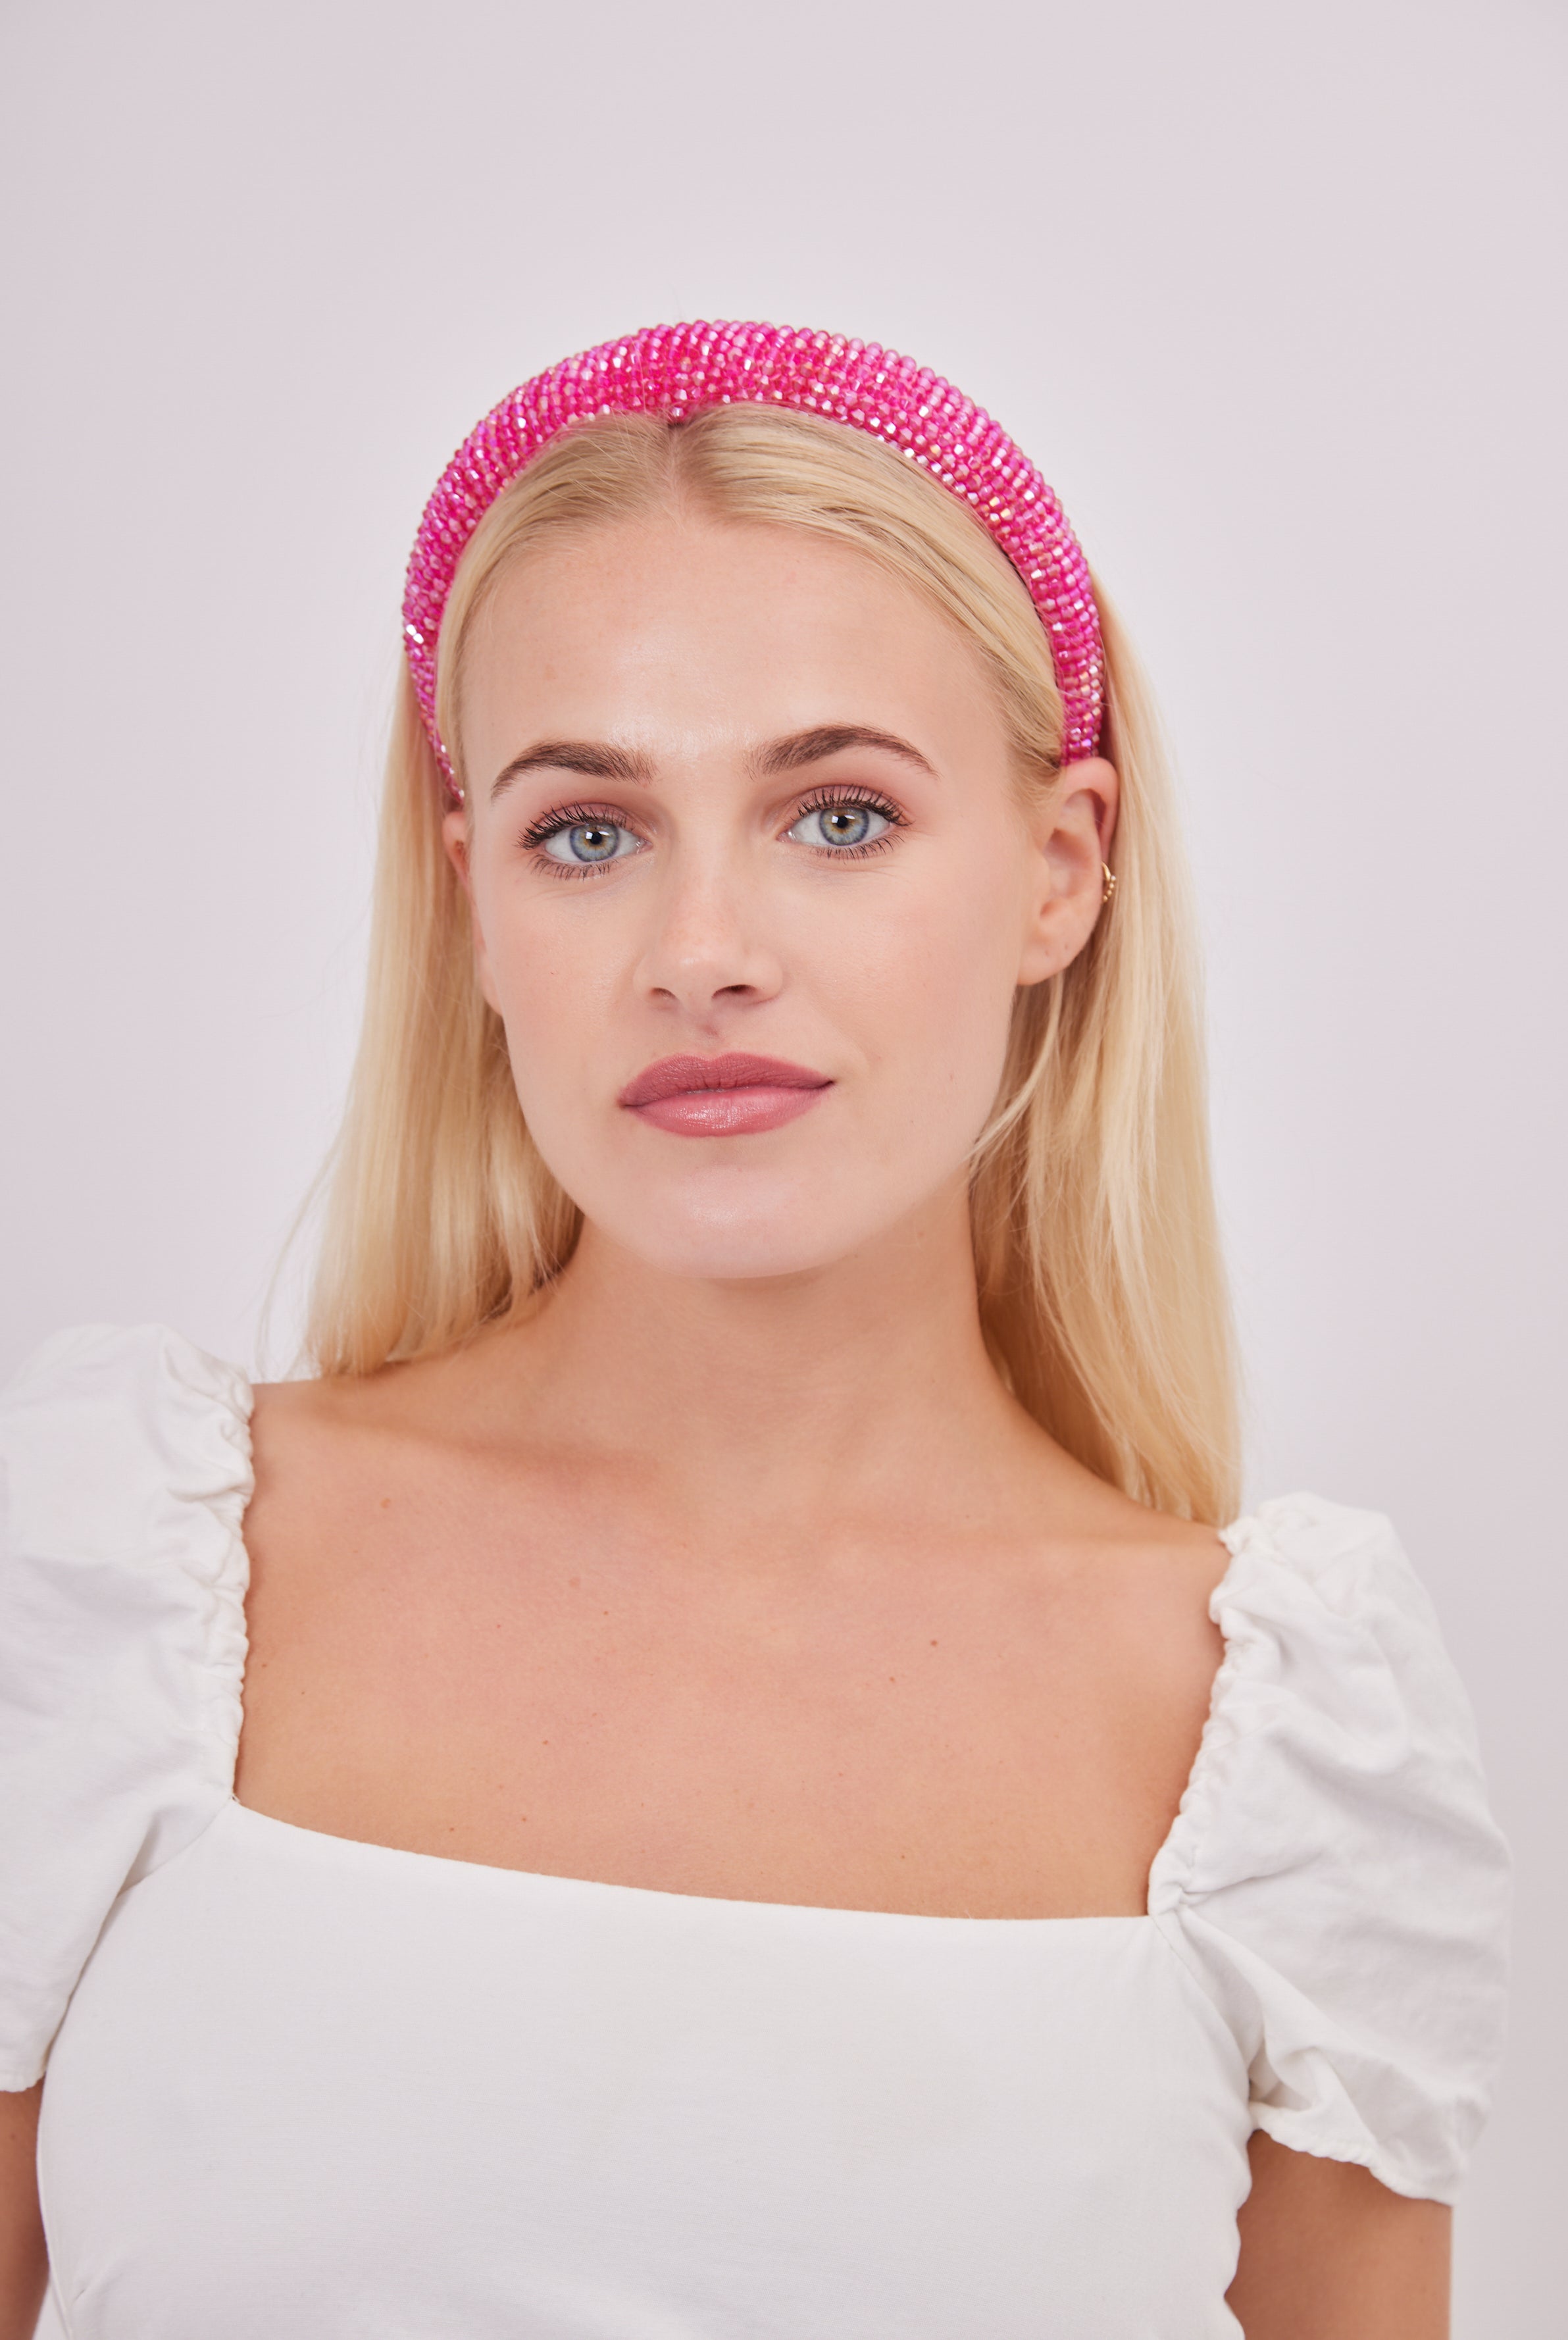 Beaded Headband in Hot Pink | Barbiecore | Barbie | Party | Occasion | Wedding | Halloween | Christmas | New Years | Present | Costume | Embellished | Sparkly | Autumn | Winter | Summer | Spring | Women's Accessories